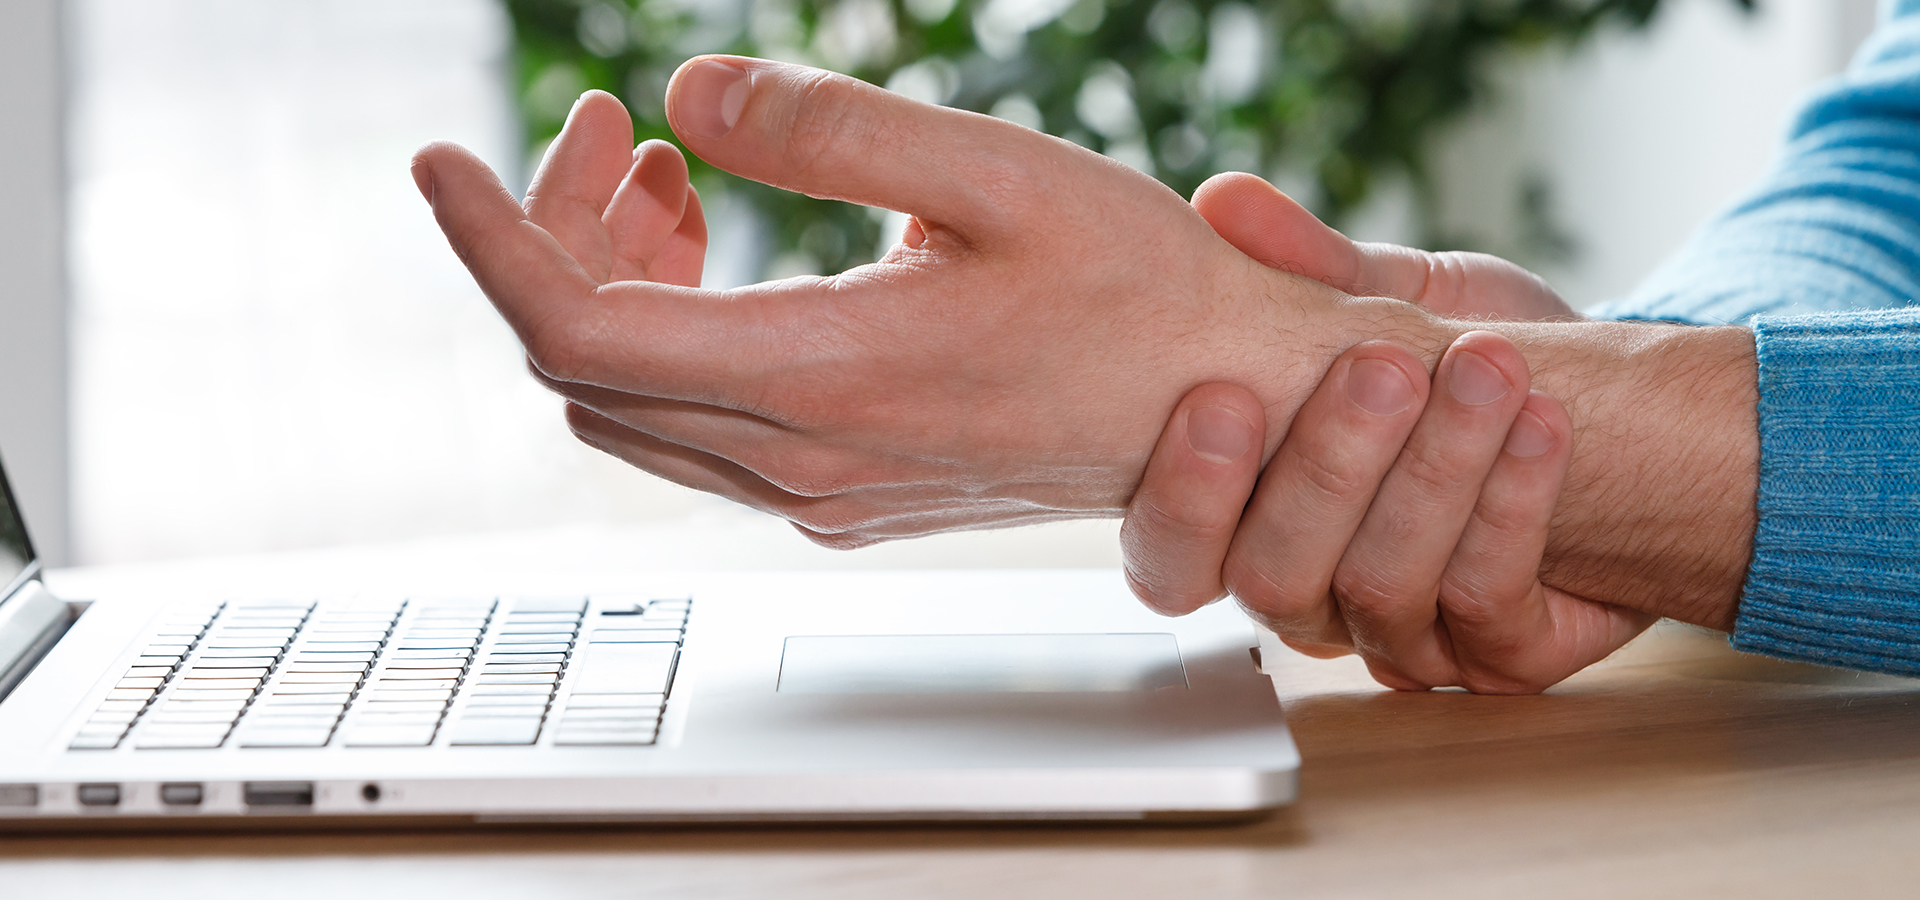 Six Tips For Carpal Tunnel Pain Relief Without Surgery » INSIGHT